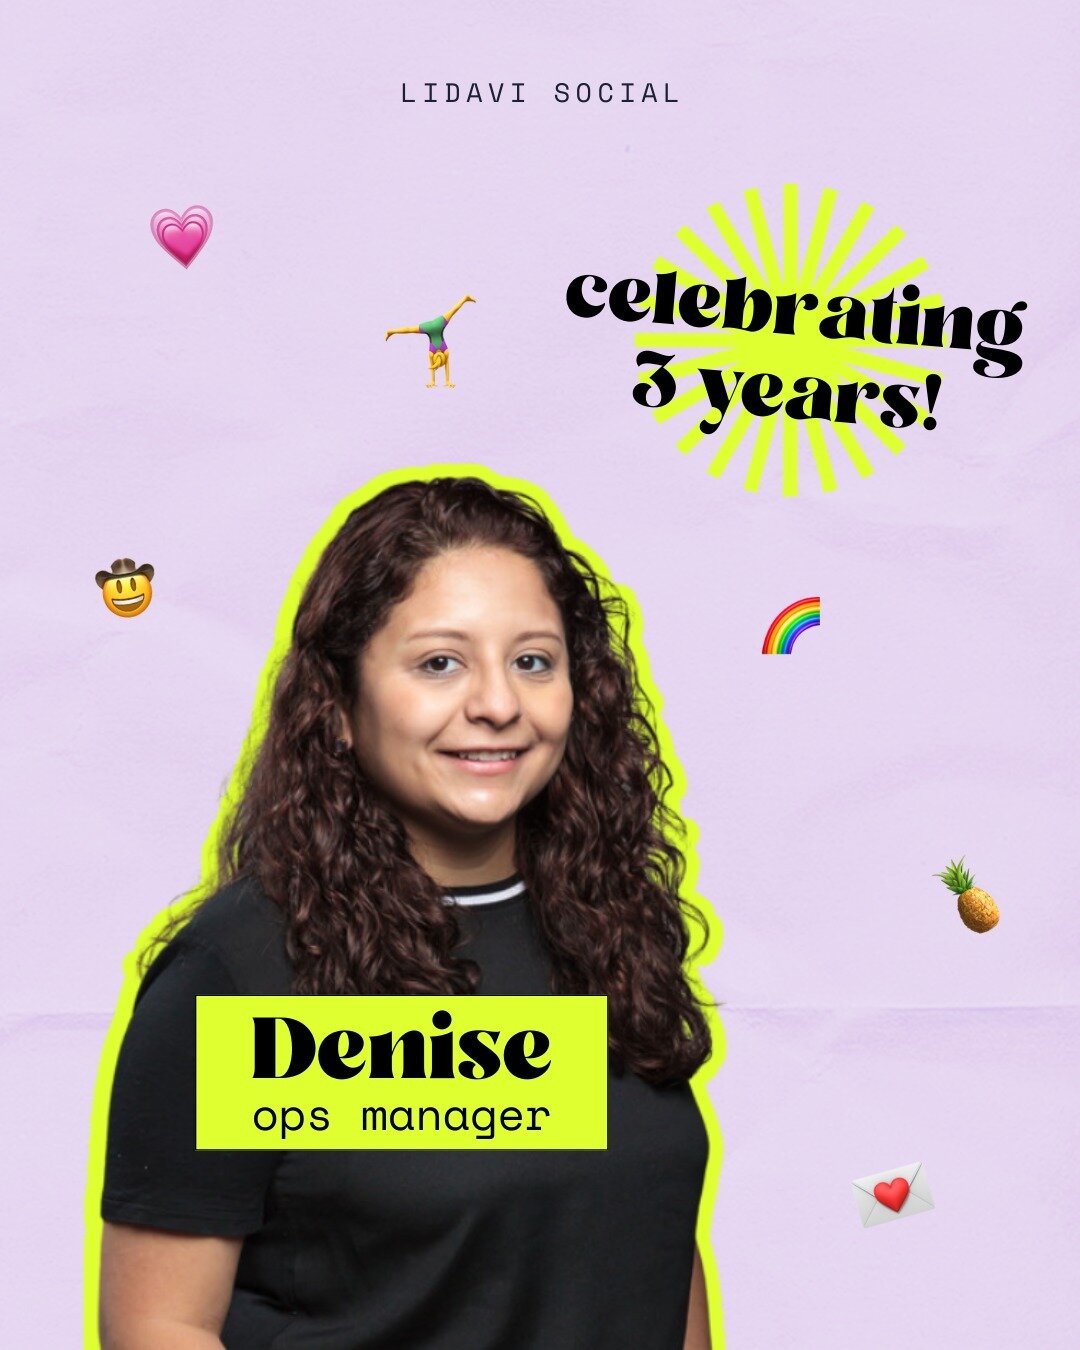 celebrating three amazing years with our ops manager, Denise! 💗 we are so happy to have you on our team, and learn from you everyday. here's to celebrating many more work anniversaries with you. 🎉⁠
⁠
help us wish Denise a happy anniversary! ✨⁠
⁠
⁠
